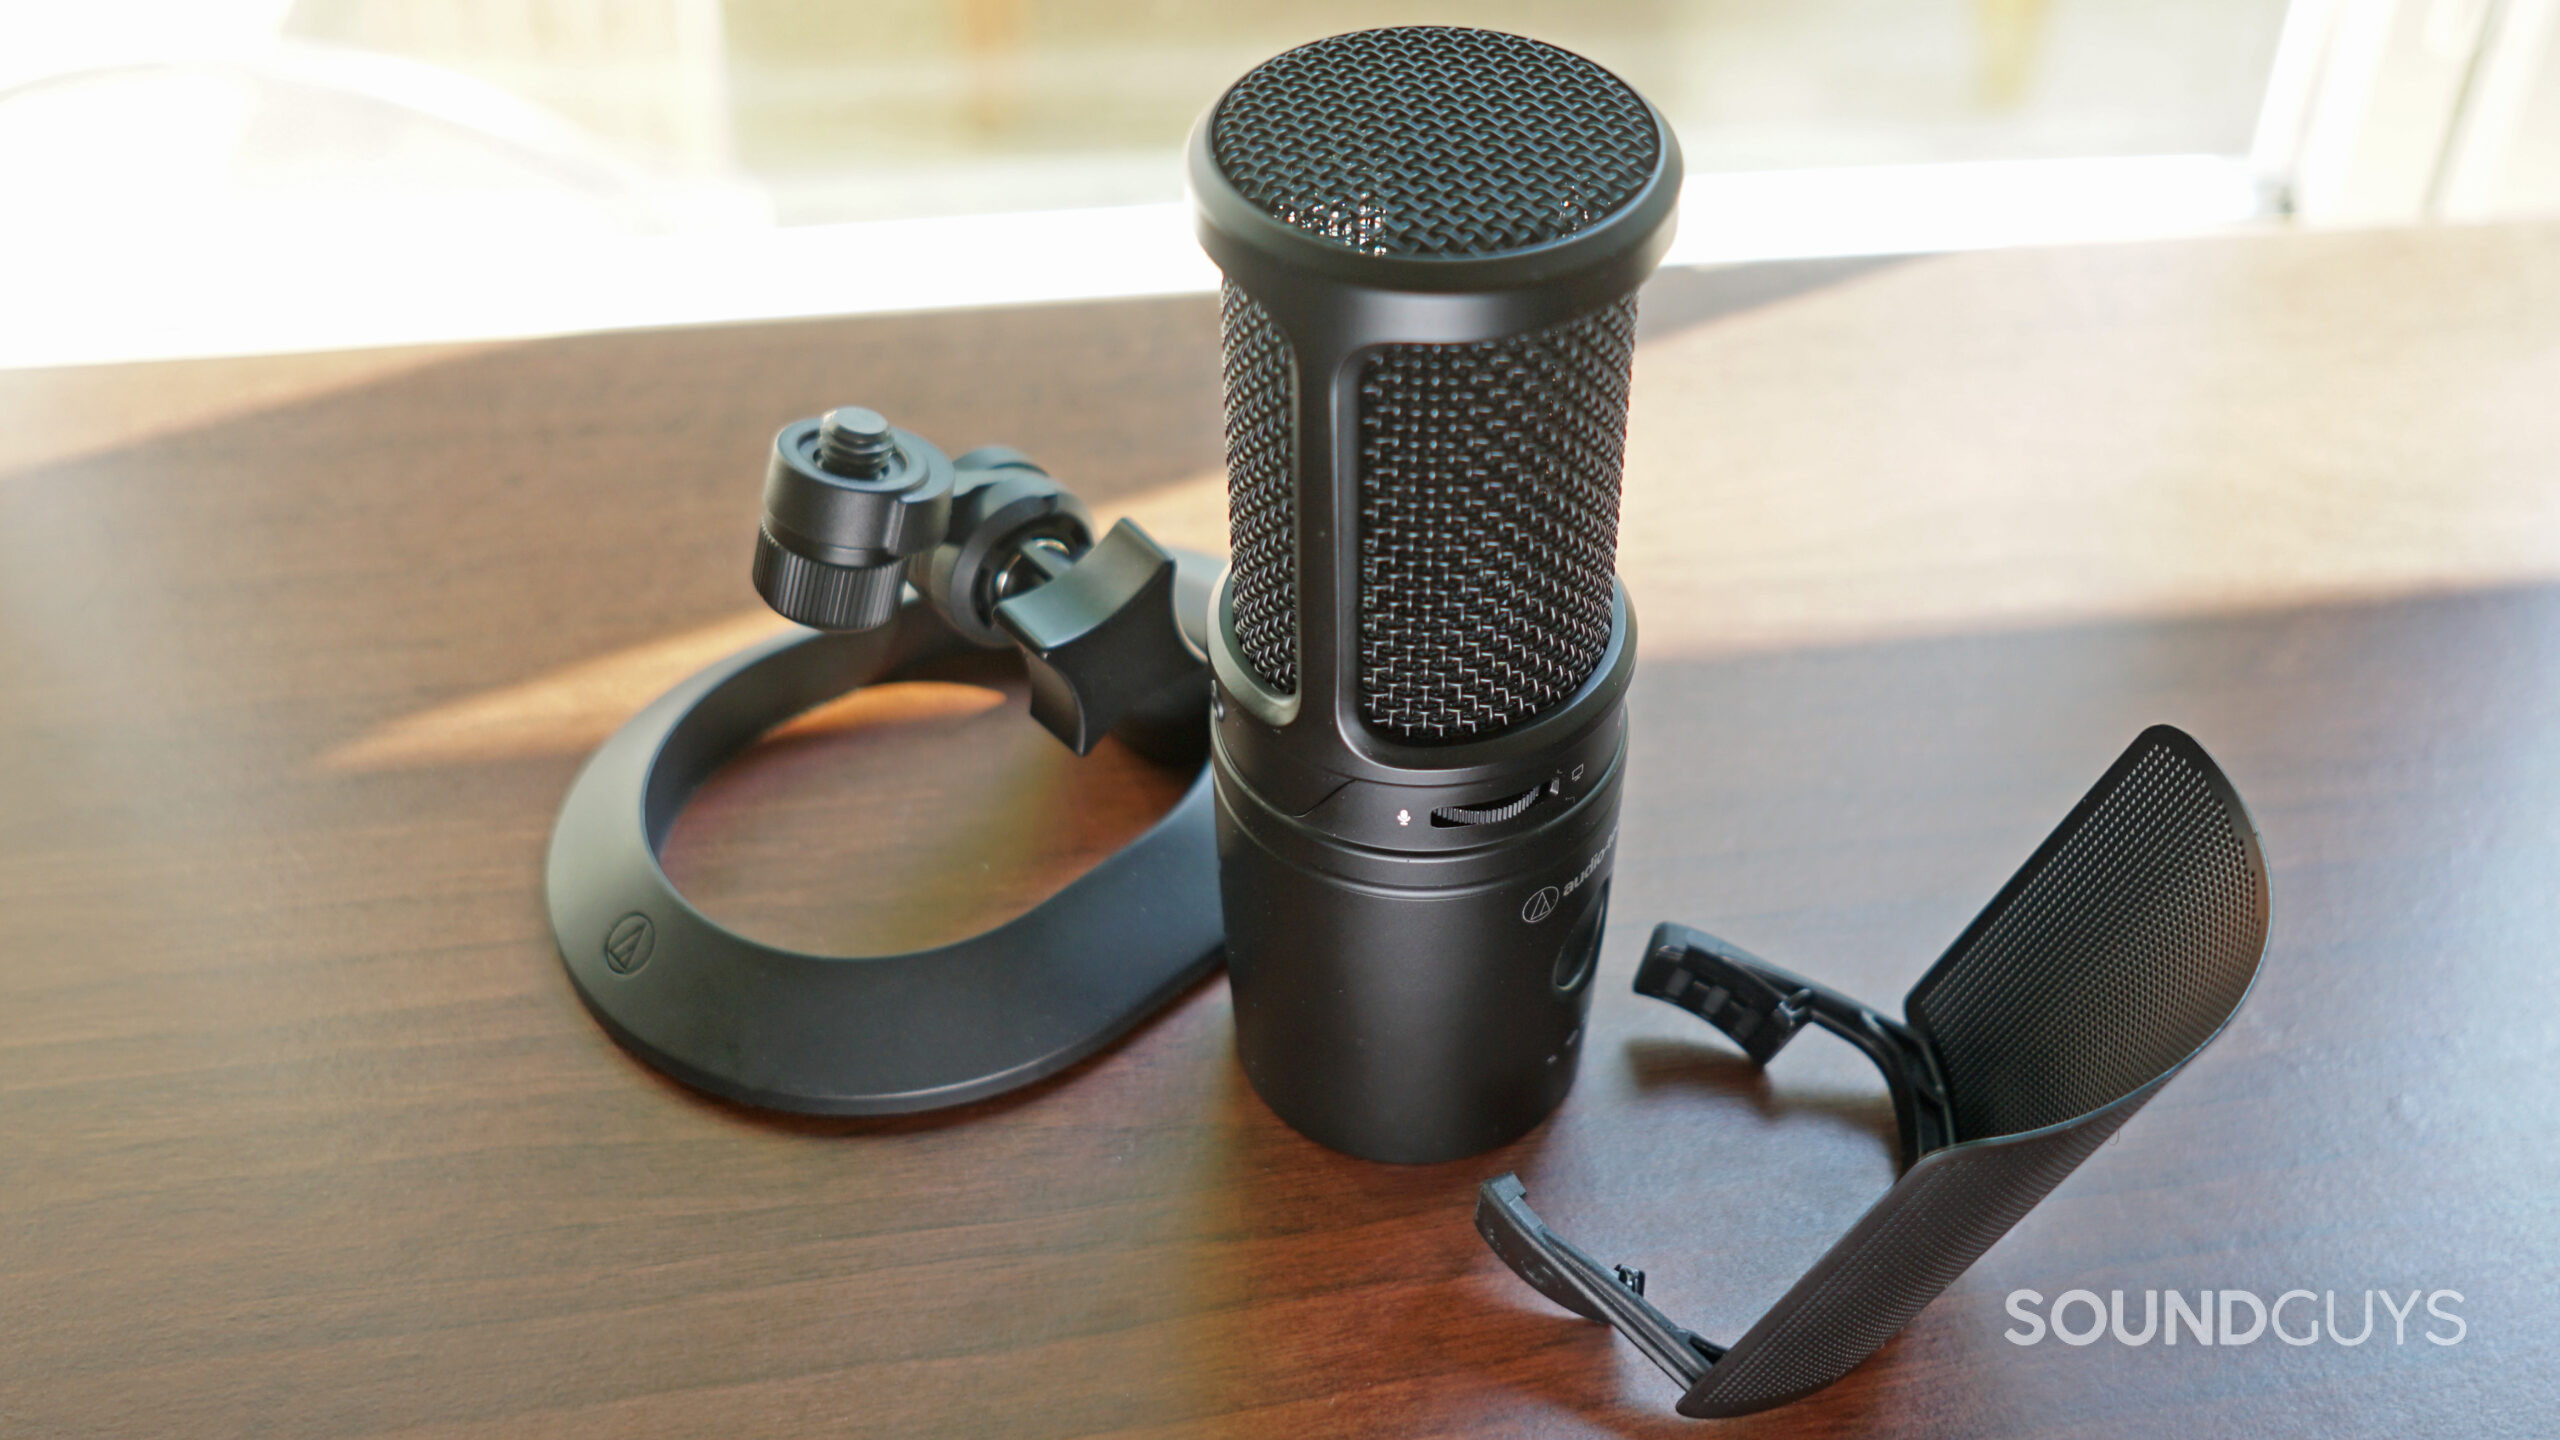 The AT2020USB-XP microphone surrounded by the two included accessories, the mount and the pop filter.